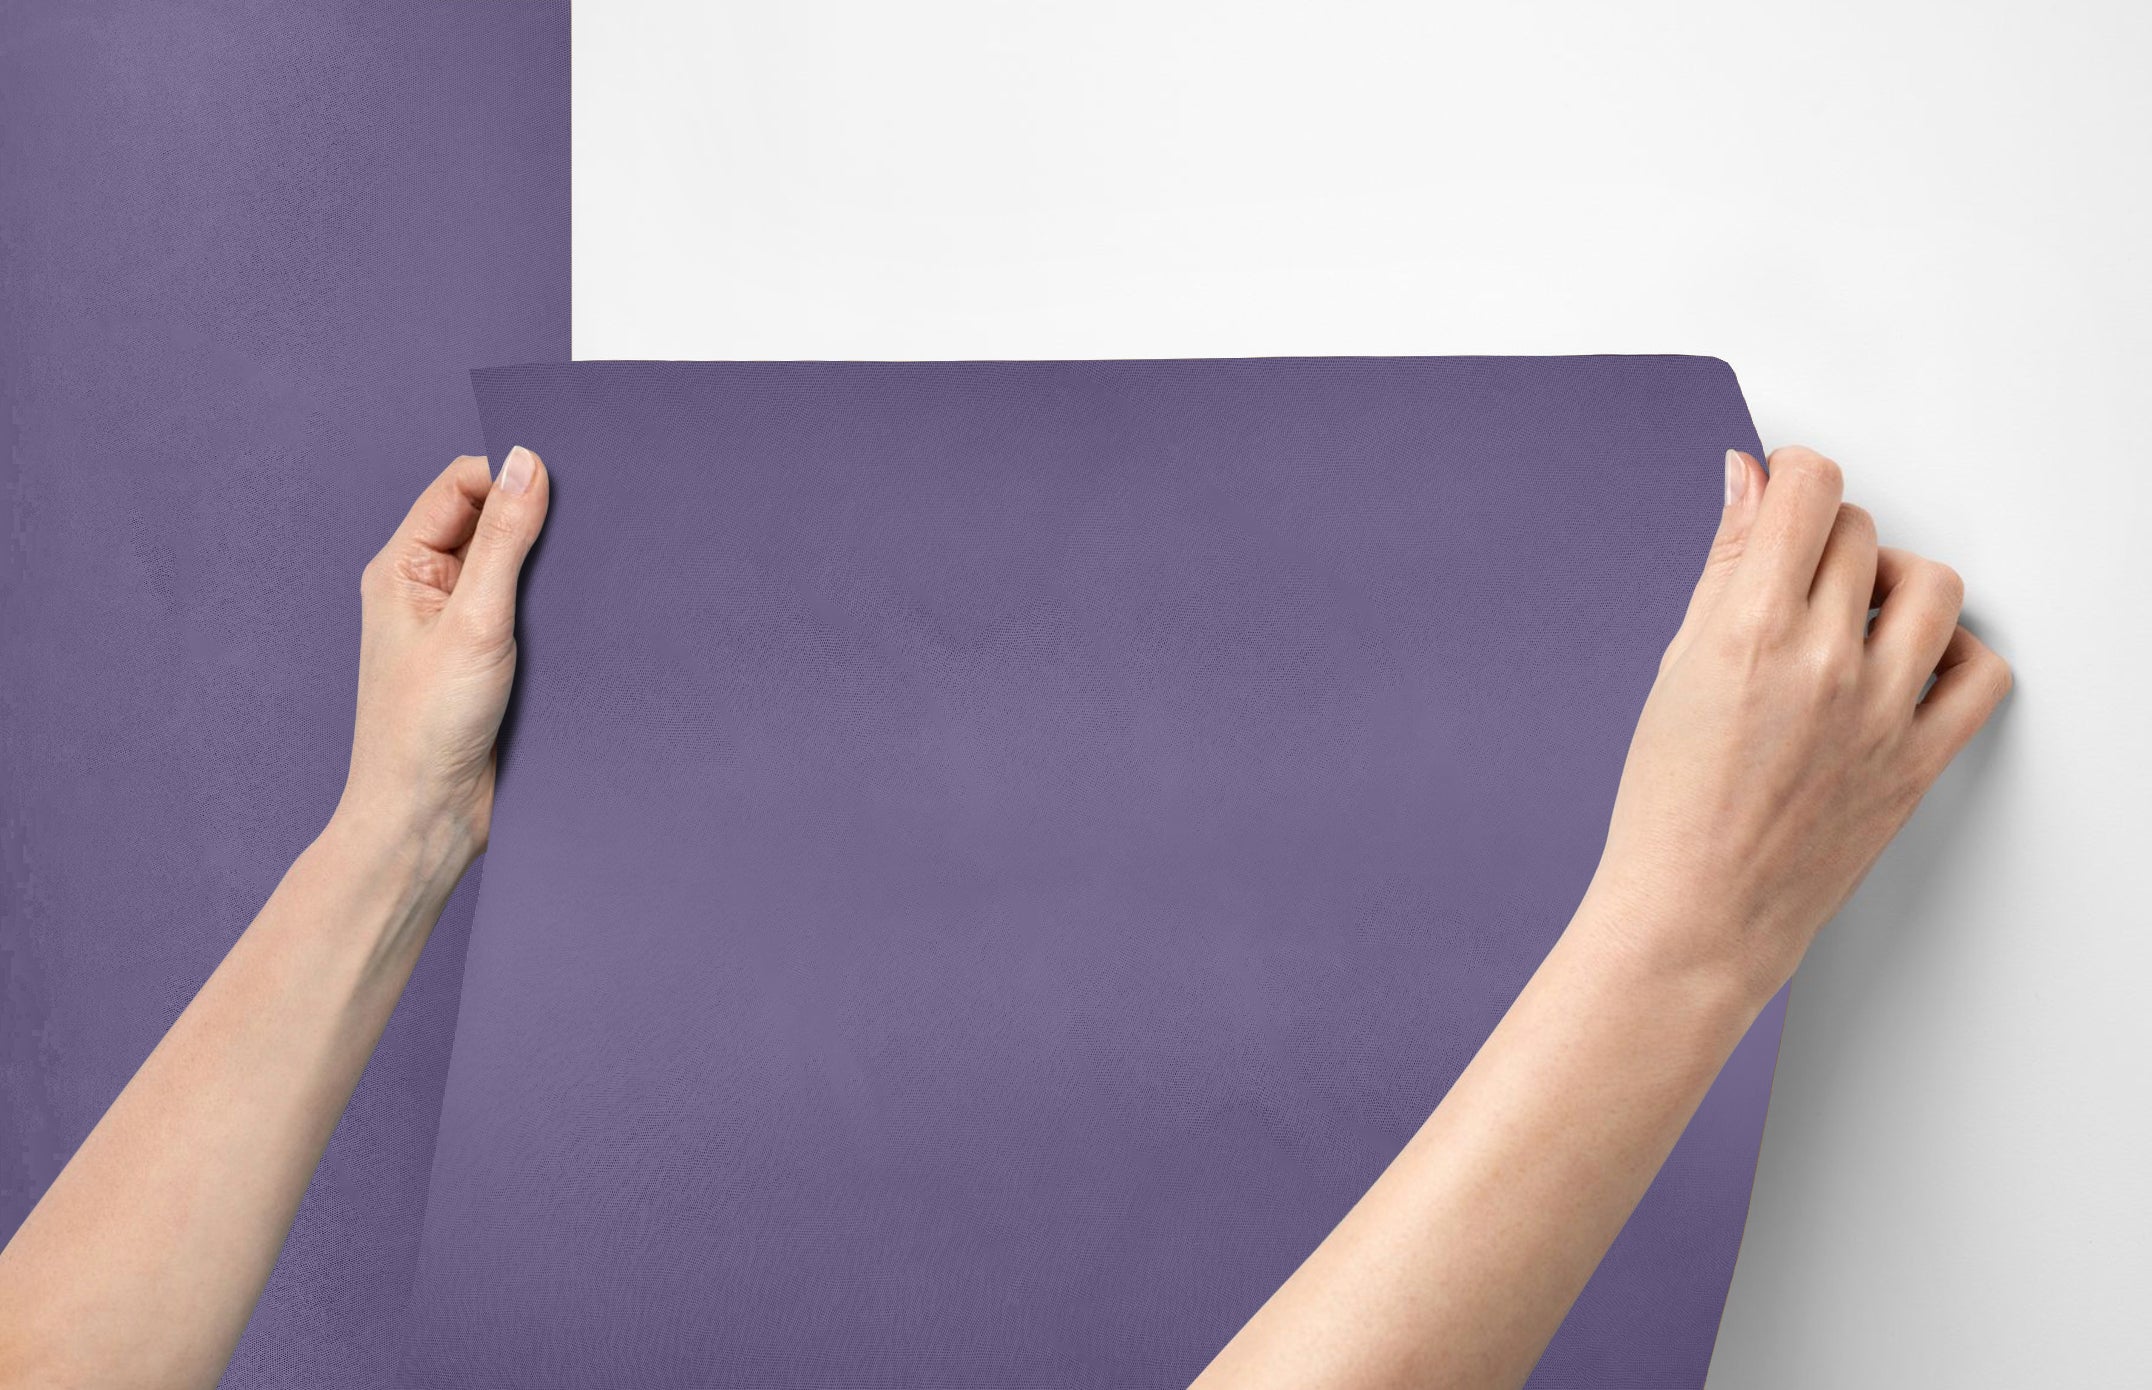 Peel & Stick Removable Re-usable Paint - Color RAL 4011 Pearl Violet - offRAL™ - RALRAW LLC, USA